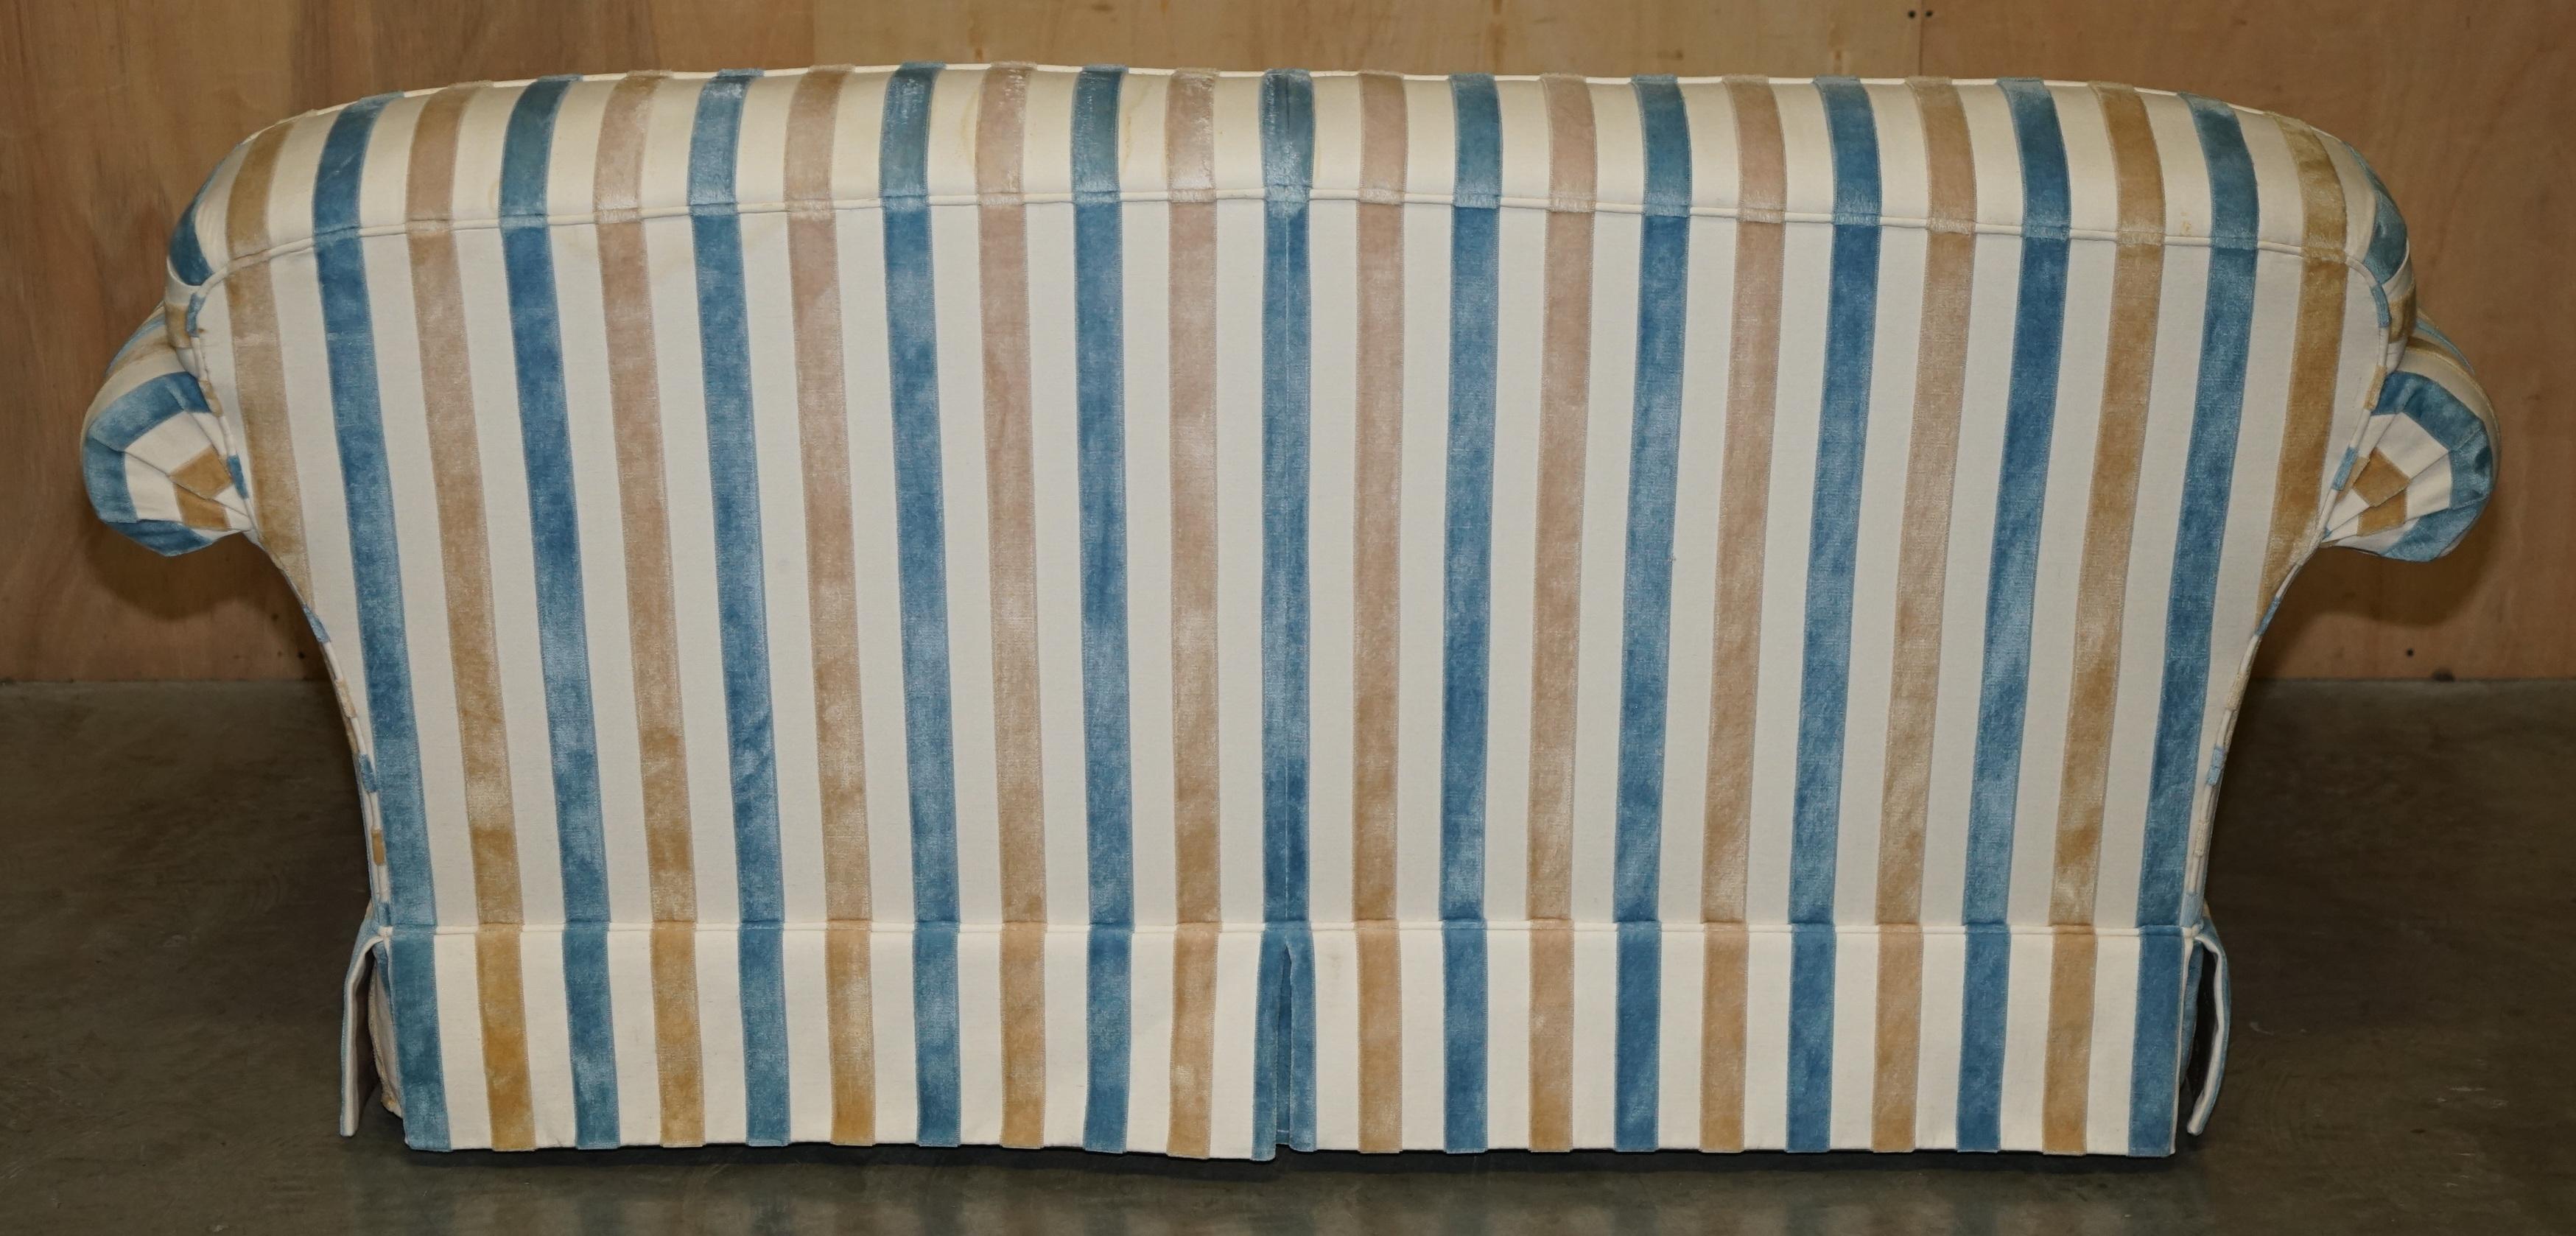 1 OF 2 STUNNING MULBERRY HOME DESiGNER CONTEMPORARY STRIPED TWO SEATER SOFAS For Sale 11